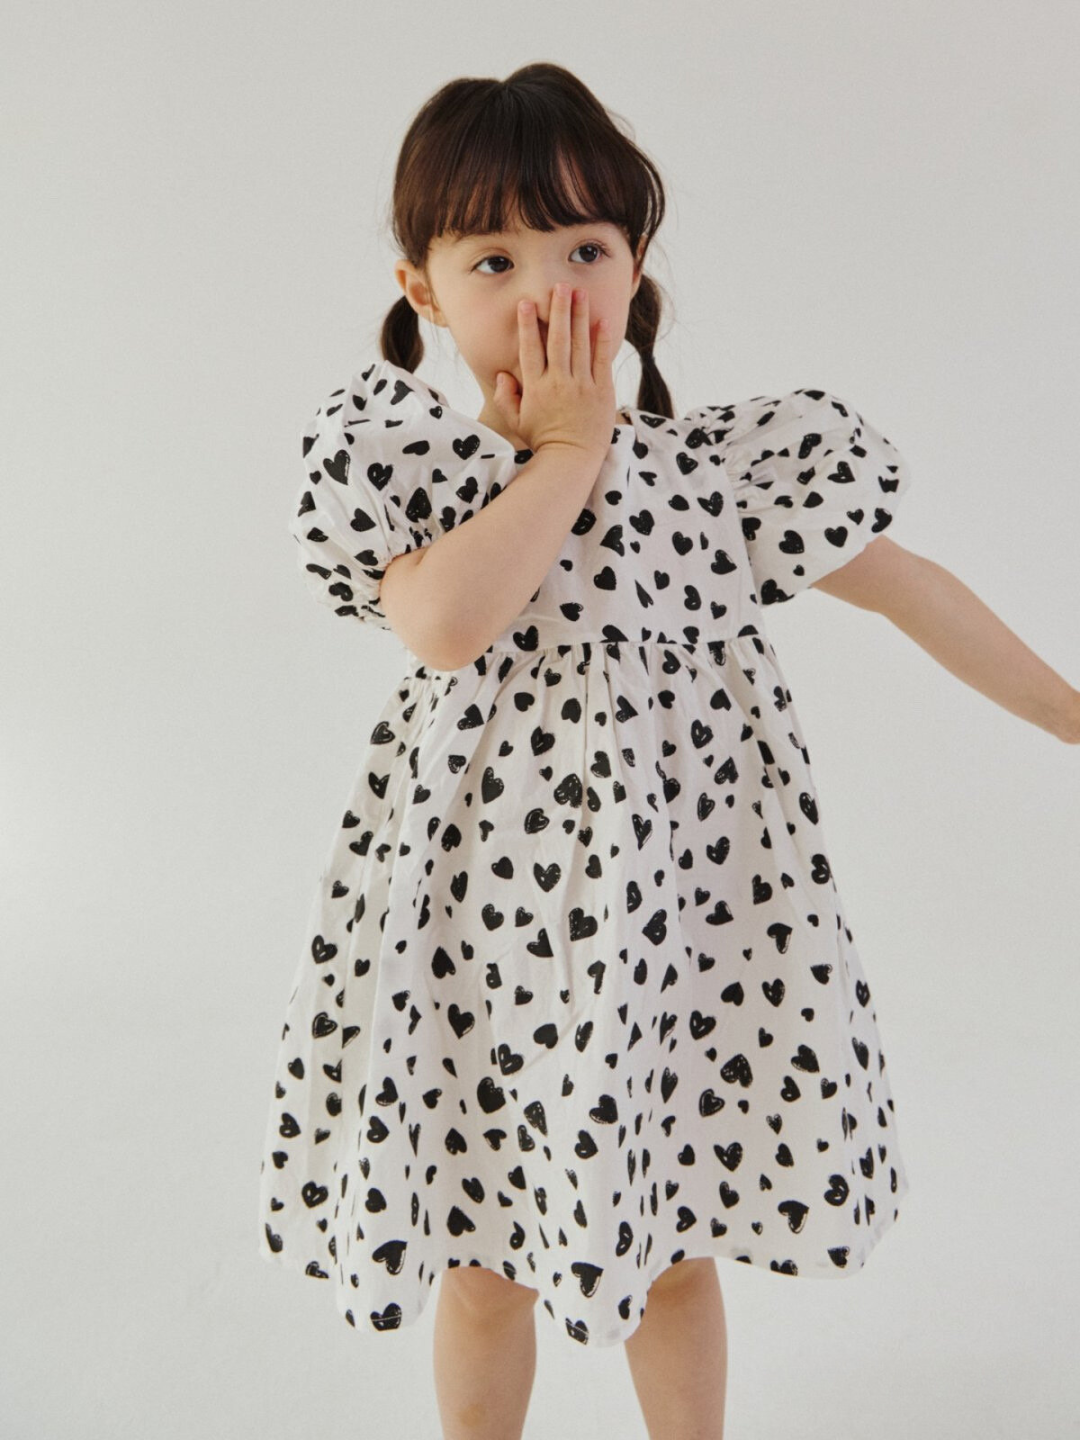 A child wearing a kids' puff-sleeved dress in a pattern of black hearts on a white background